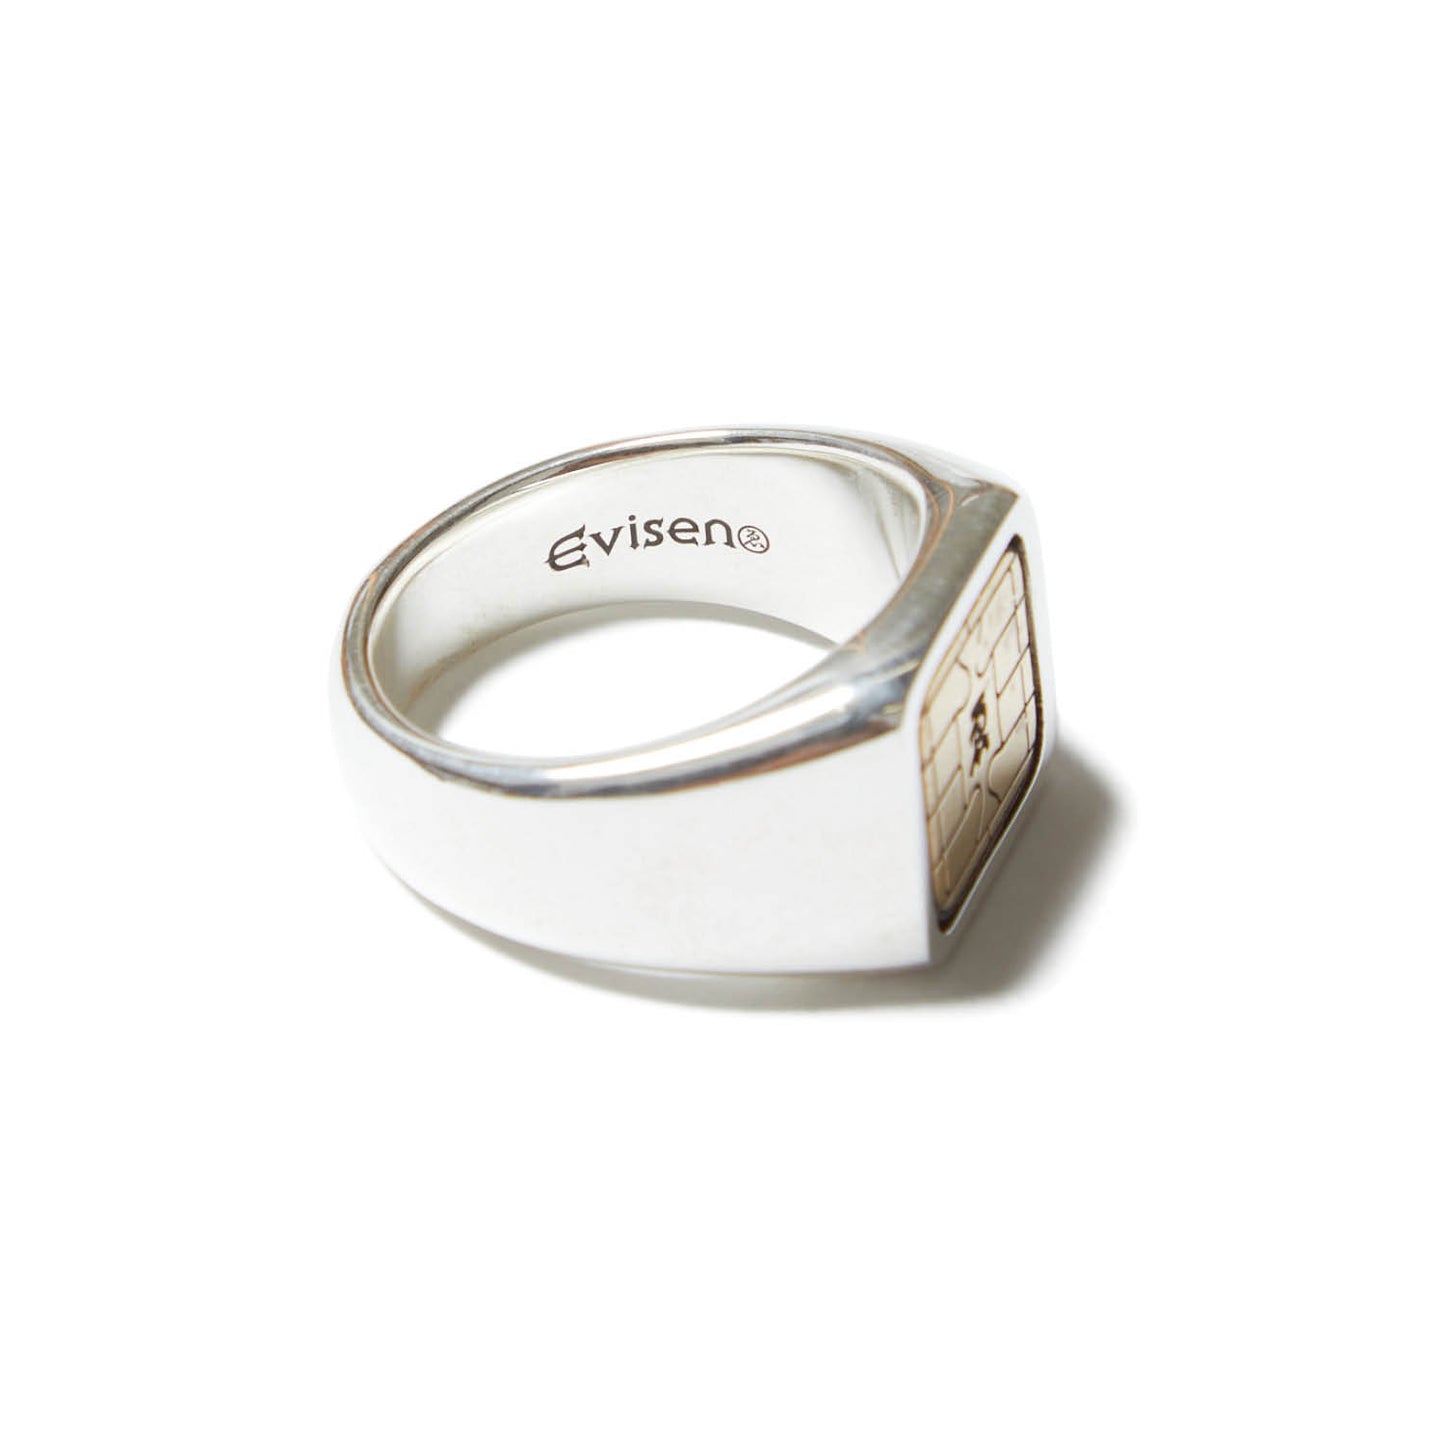 IC CHIP RING - SILVER